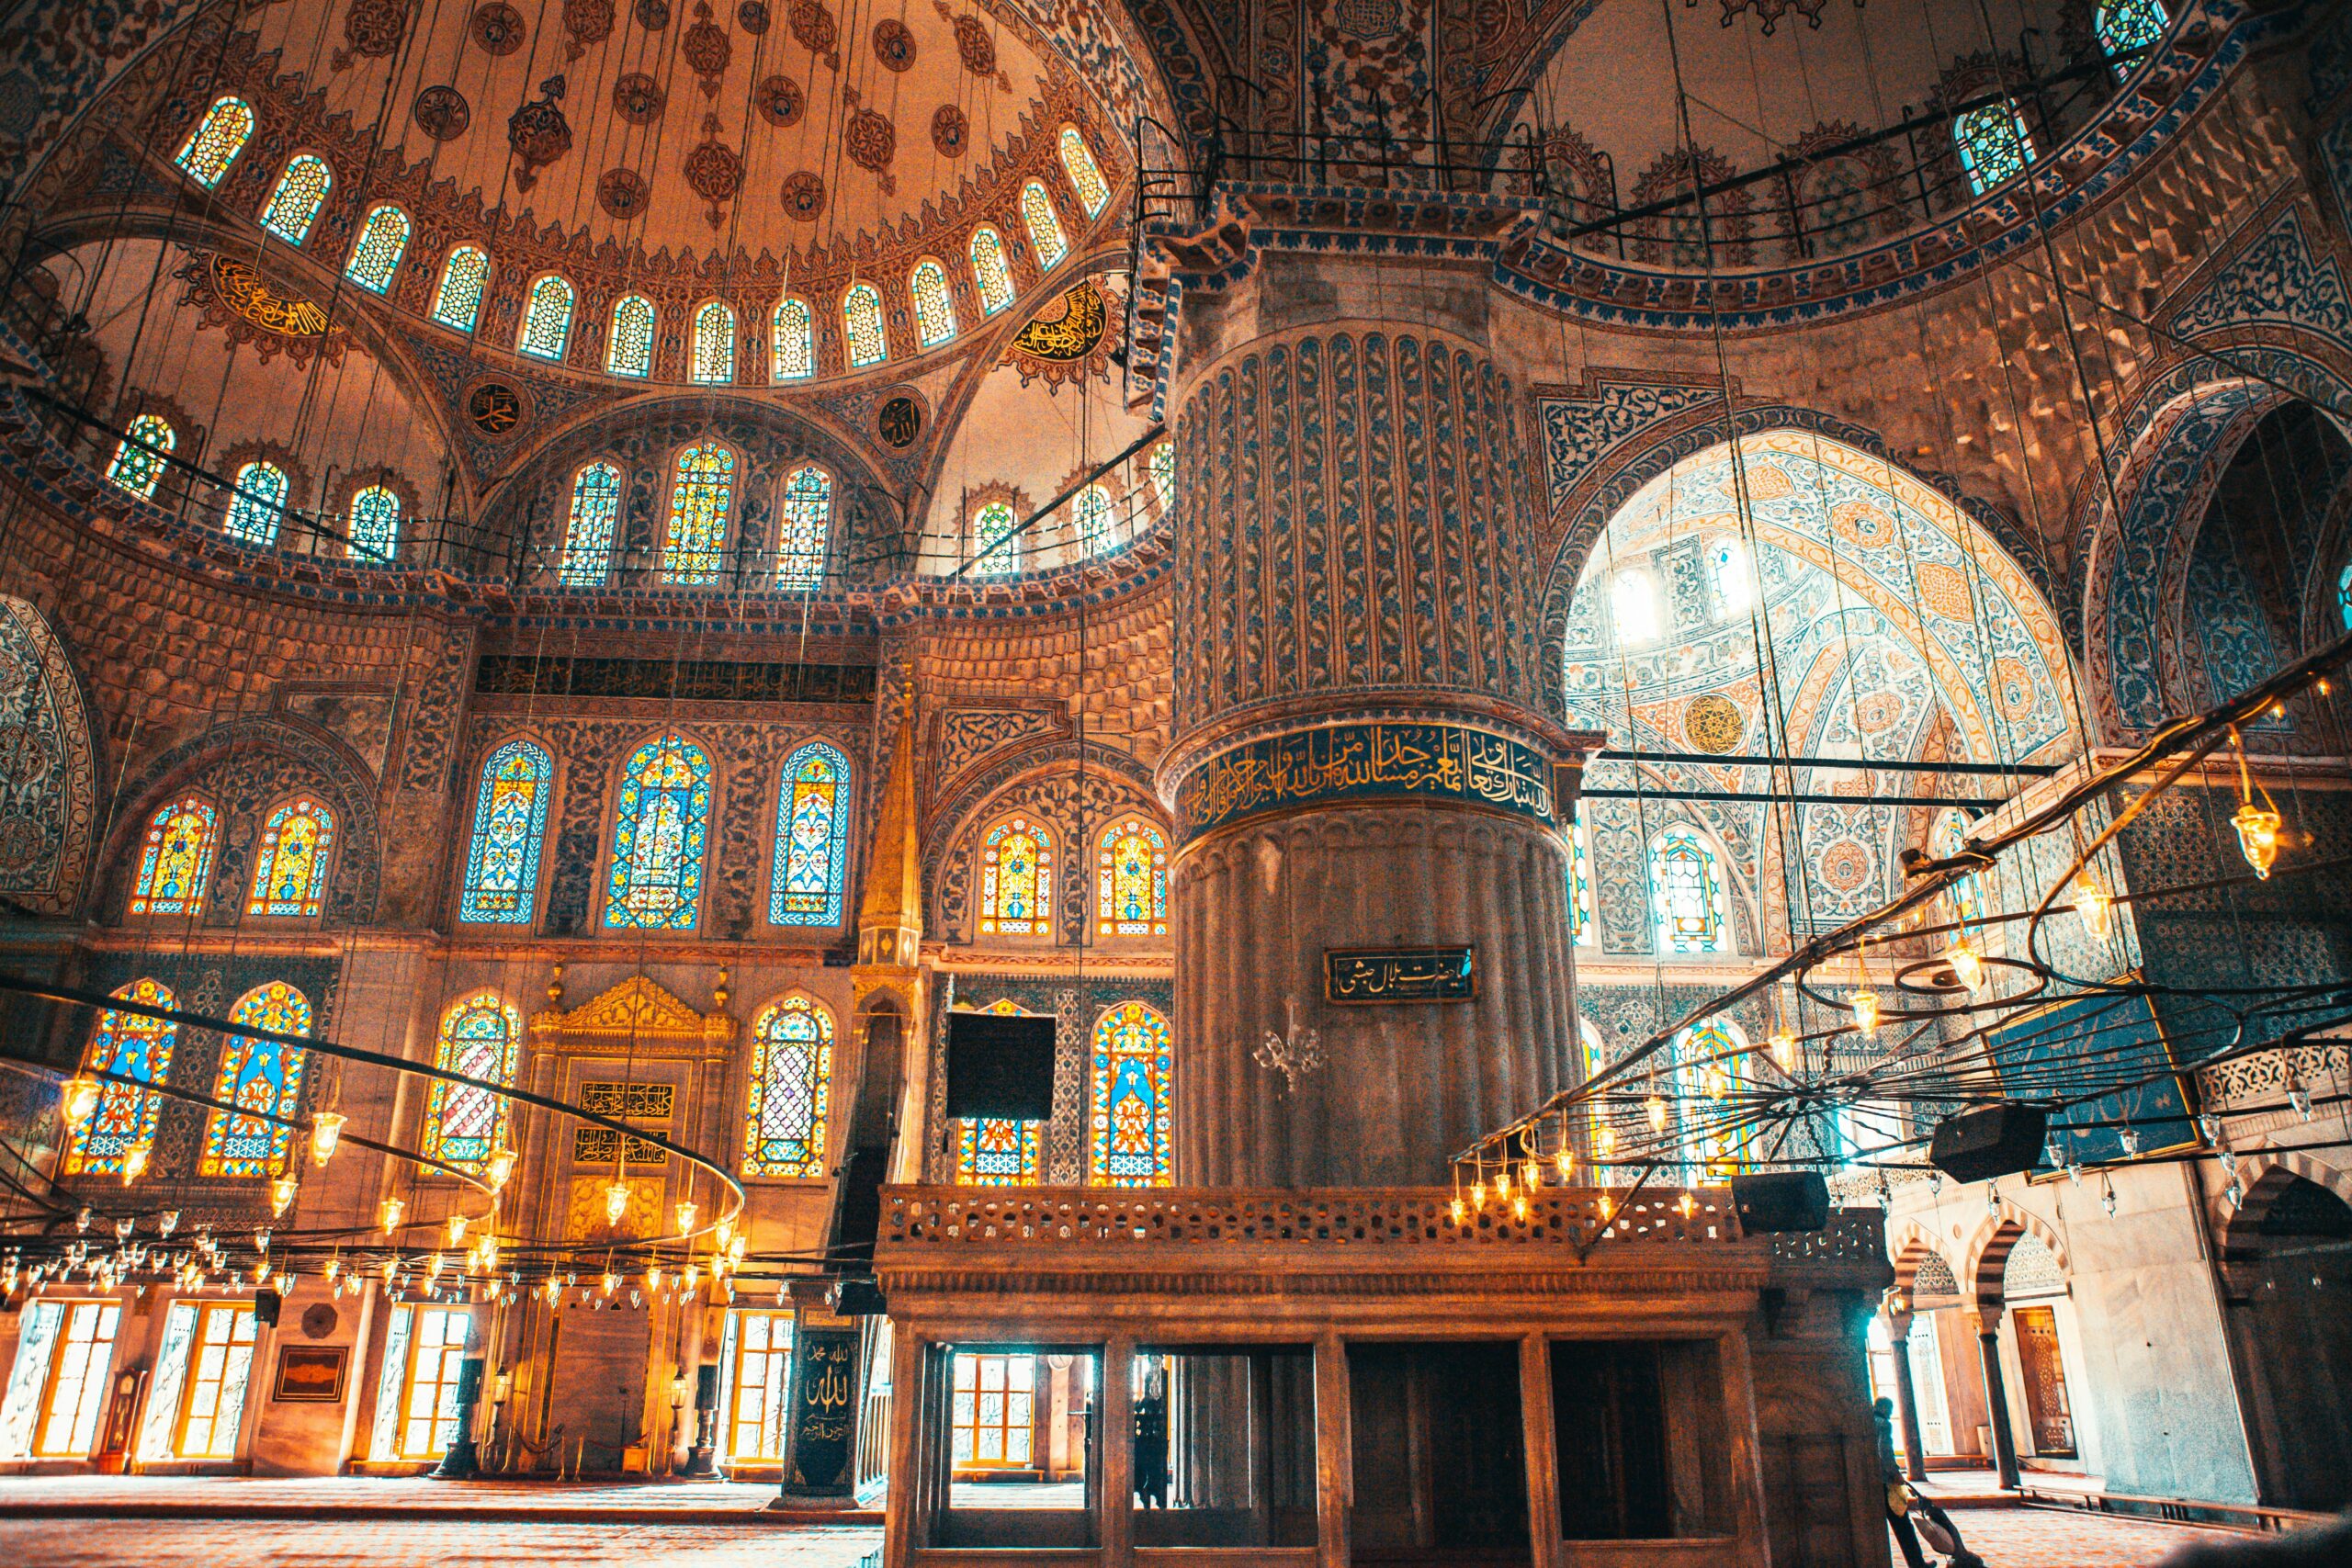  Nick Walton reveals some of his favourite enclaves, precincts and neighbourhoods in the timeless city of Istanbul.